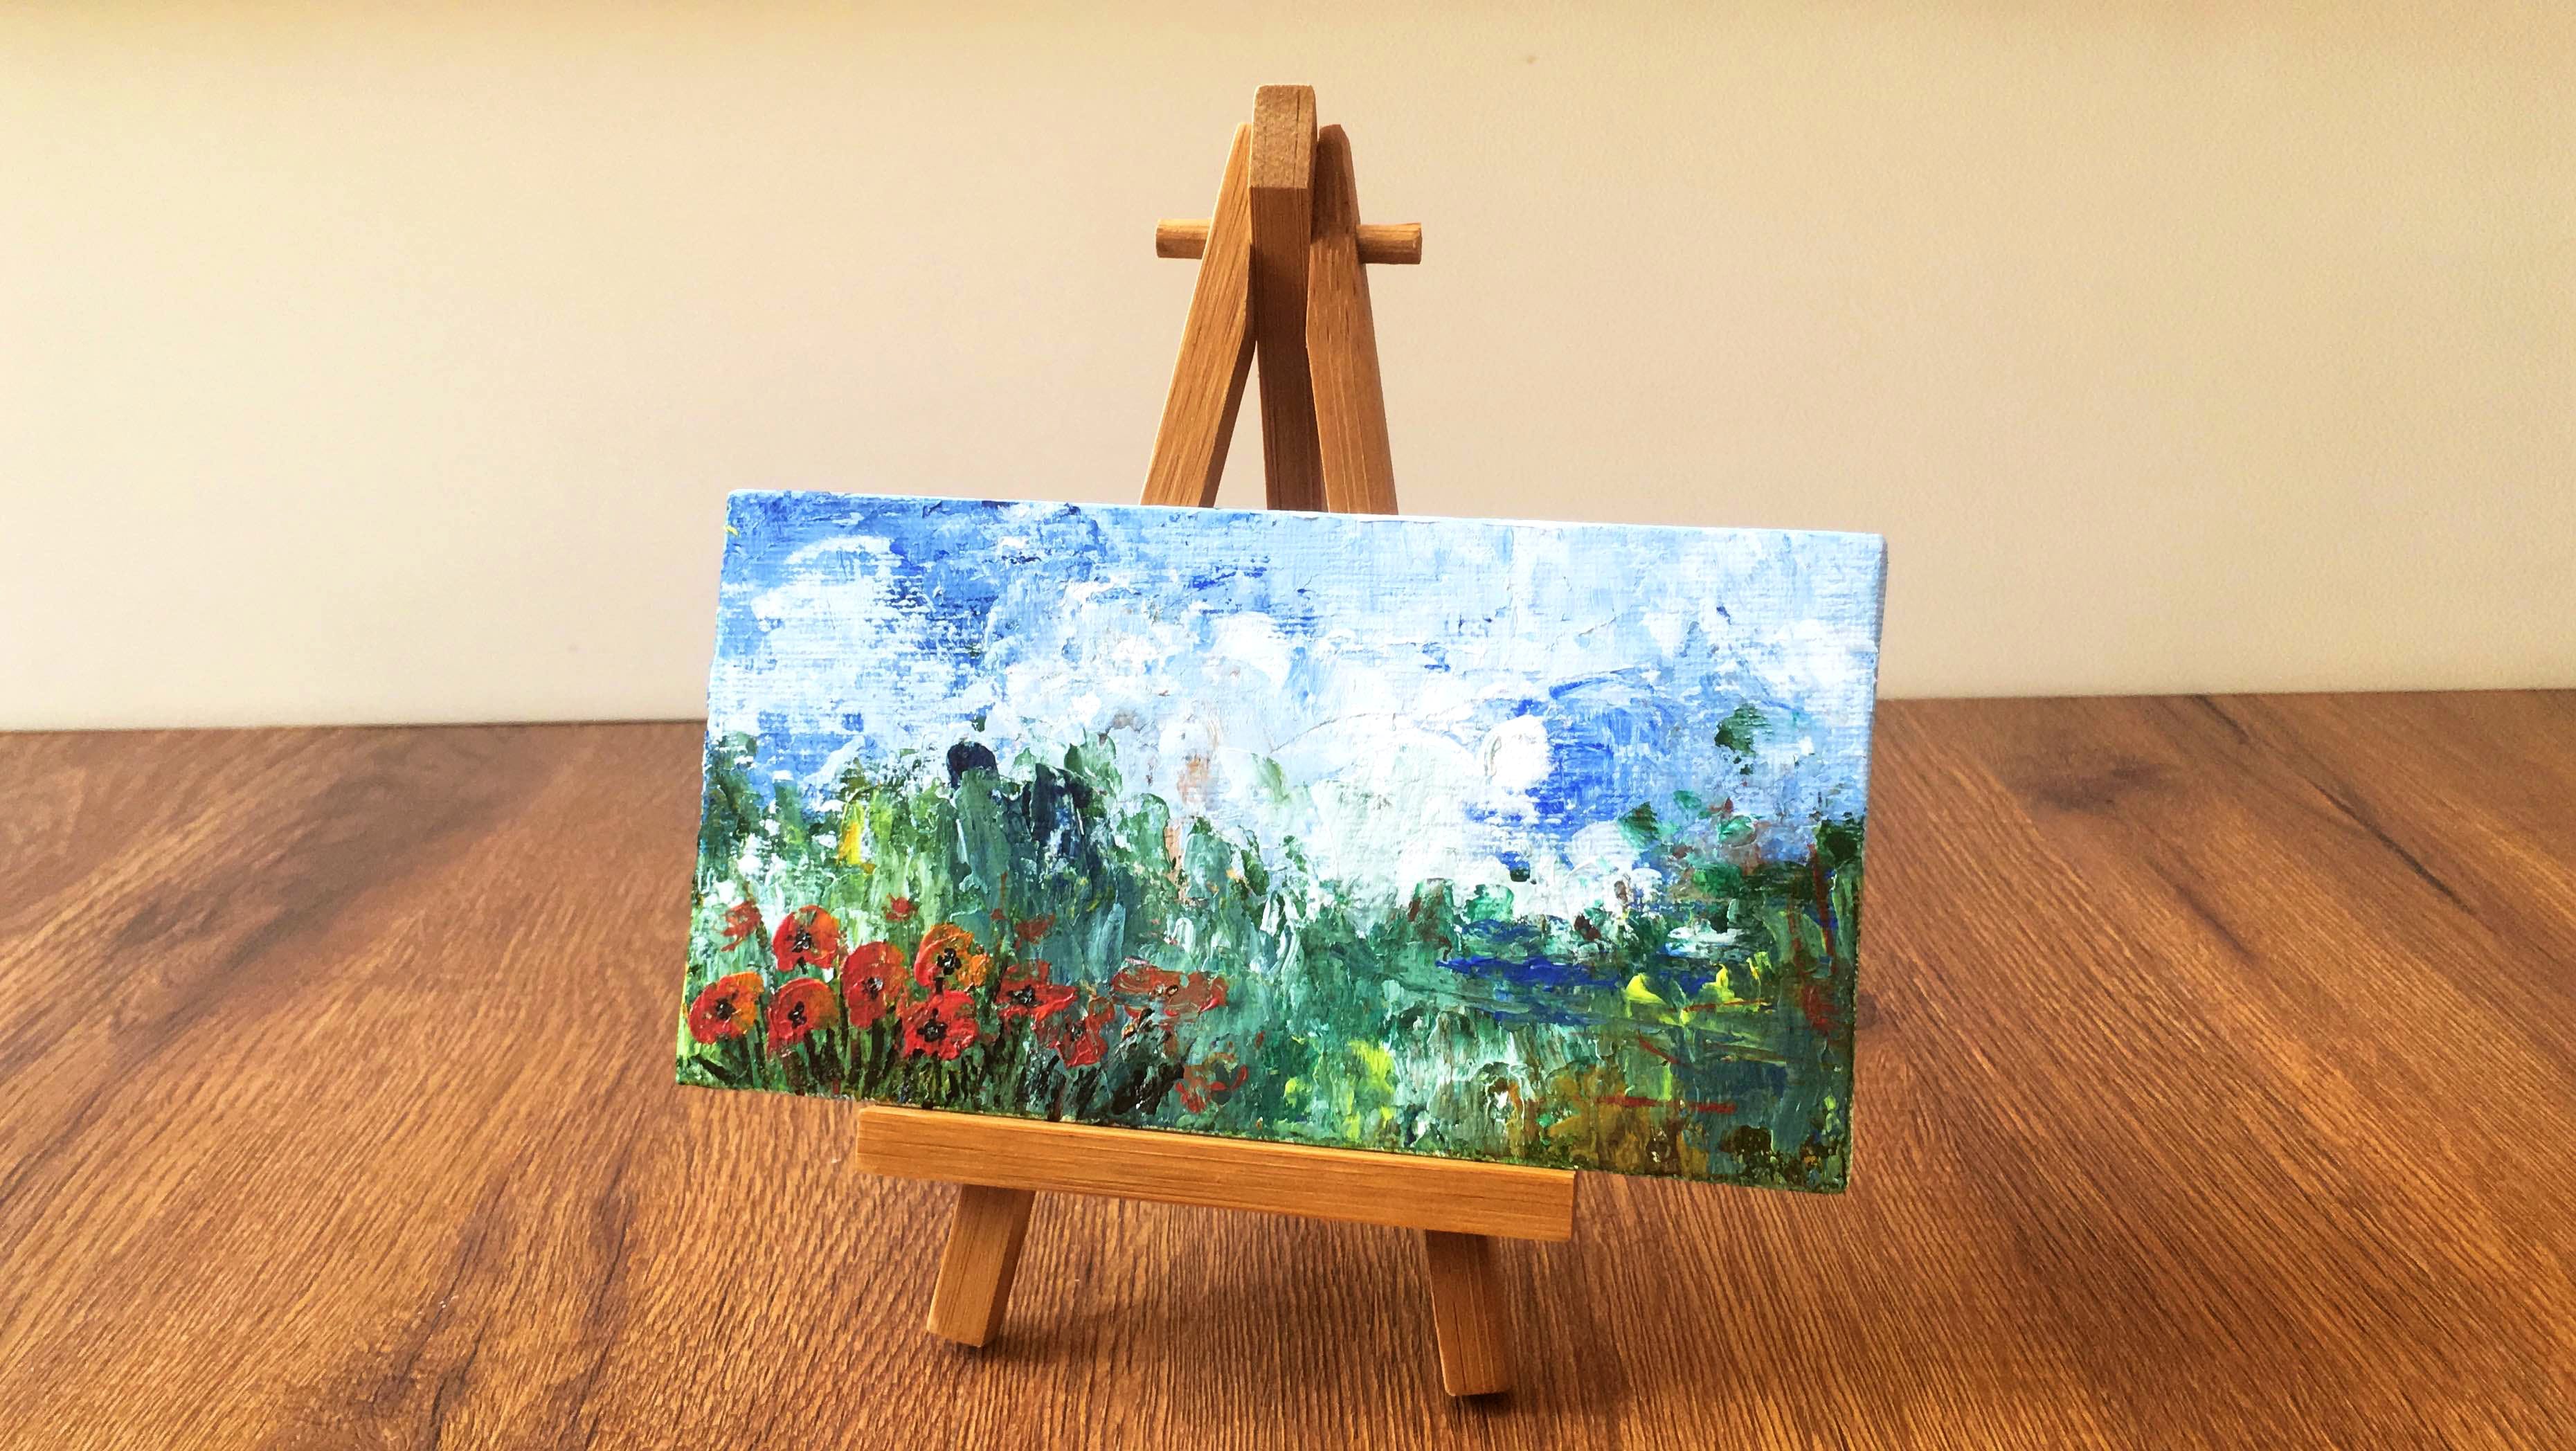 Easel,Acrylic paint,Wood,Painting,Paint,Wildflower,Table,Hardwood,Watercolor paint,Visual arts